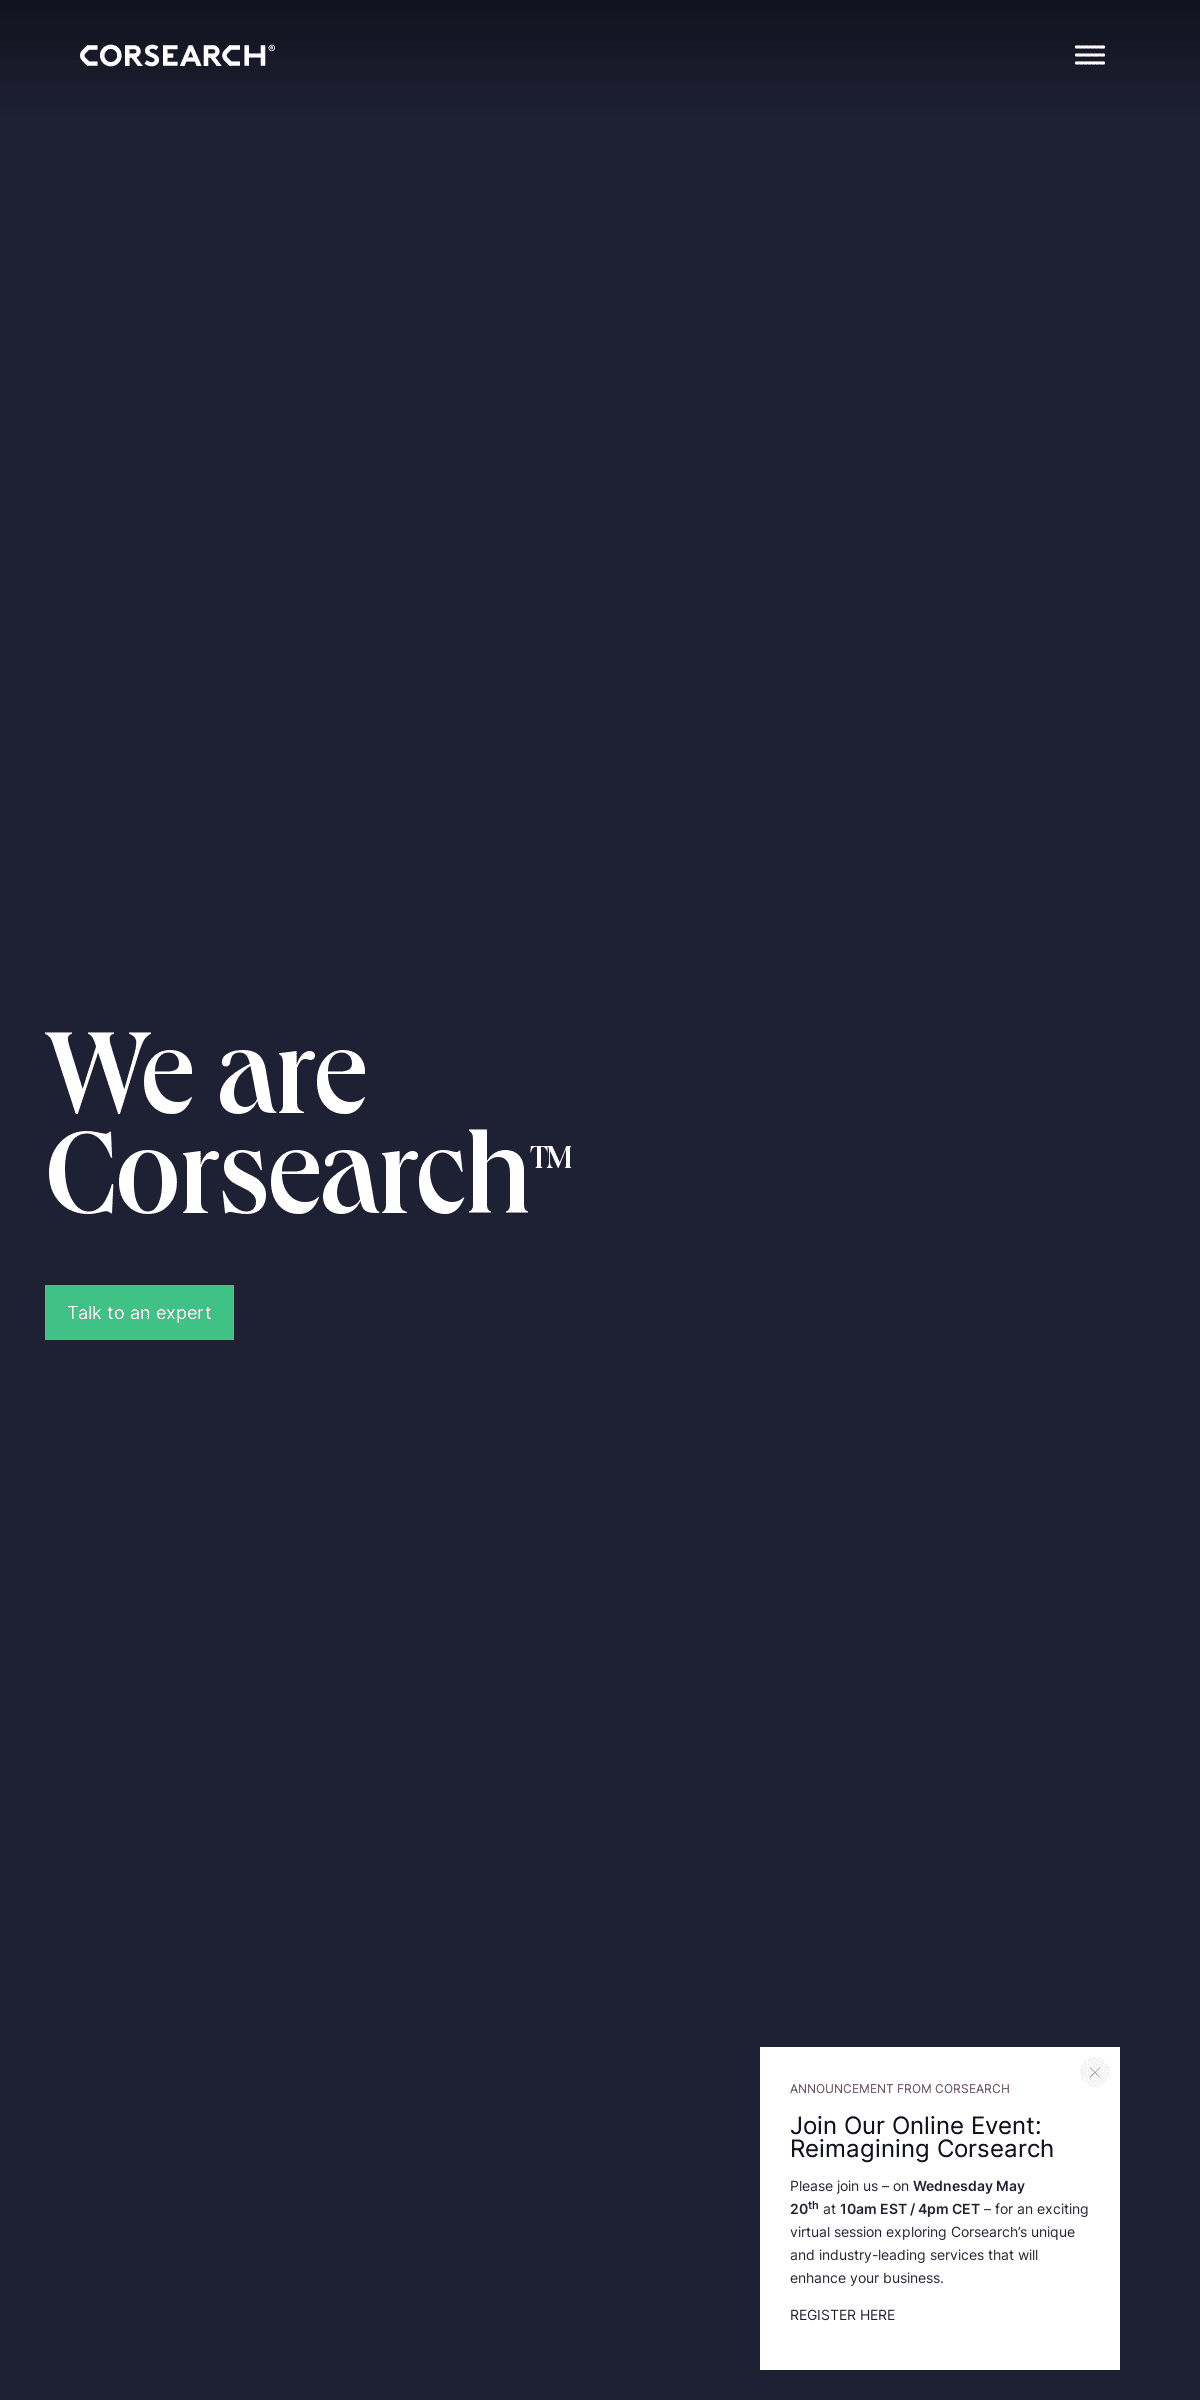 A complete backup of corsearch.com